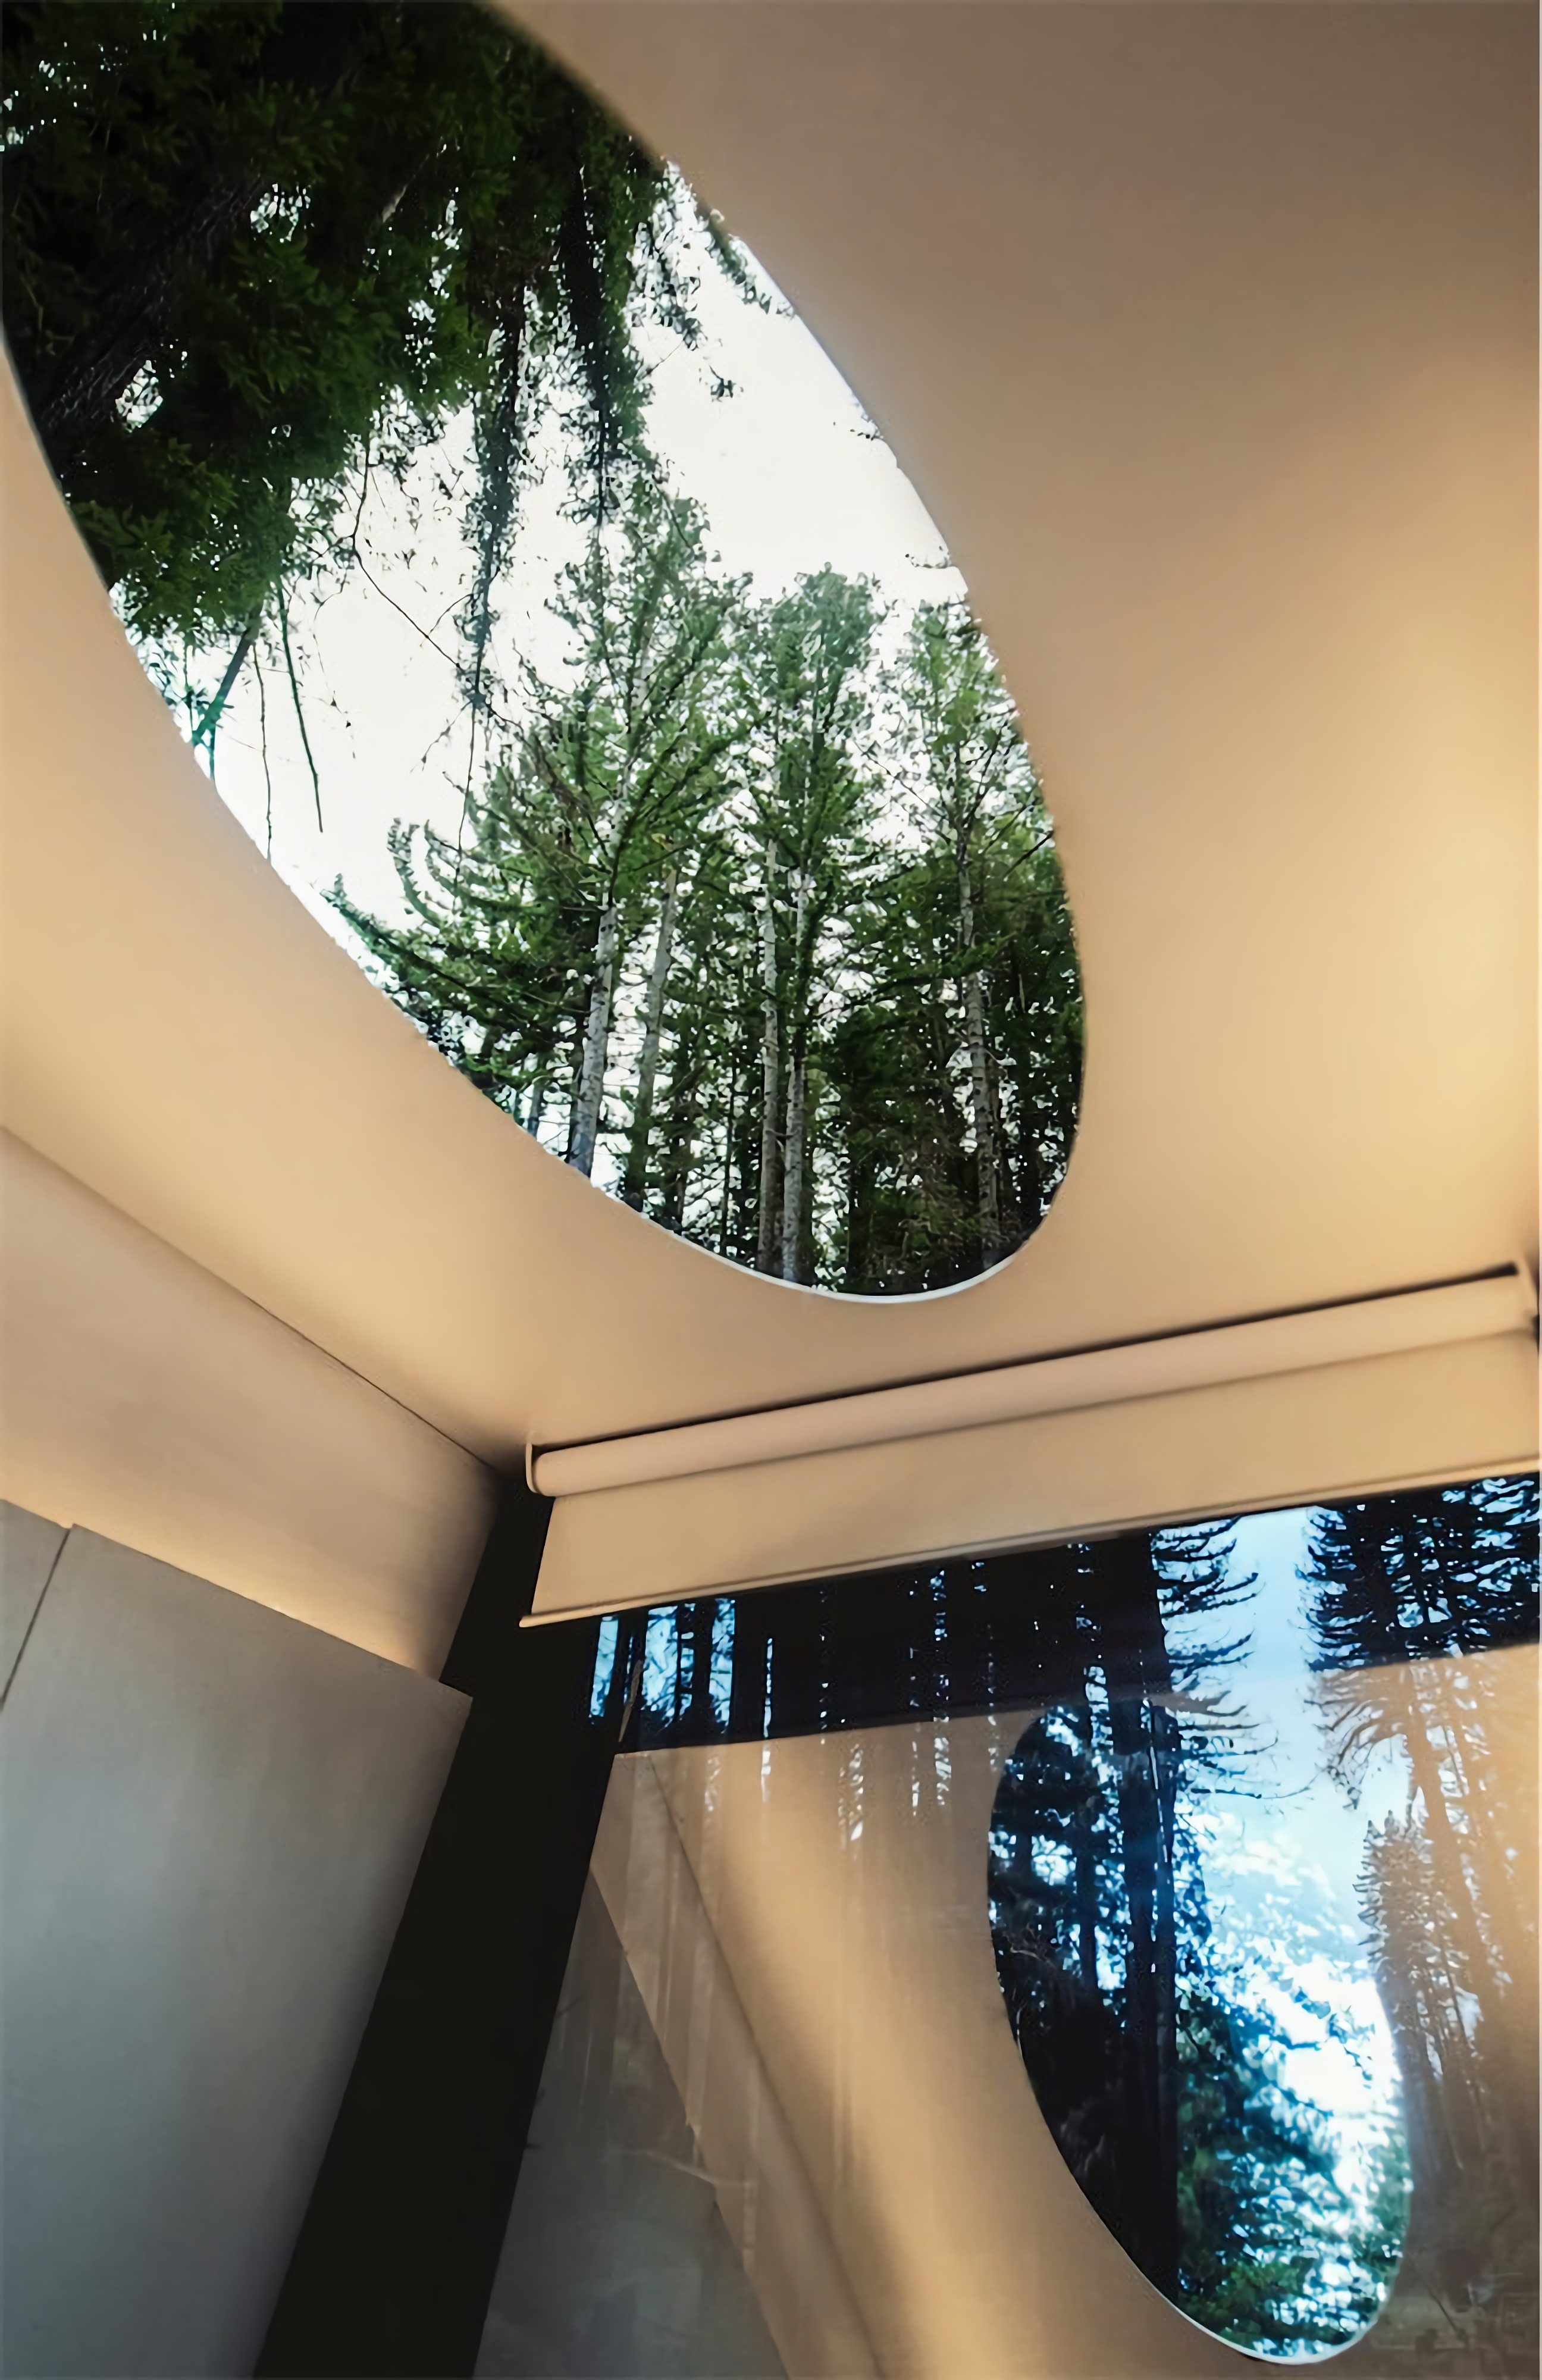 An elliptical skylight will capture a panoramic view of the trees against the sky